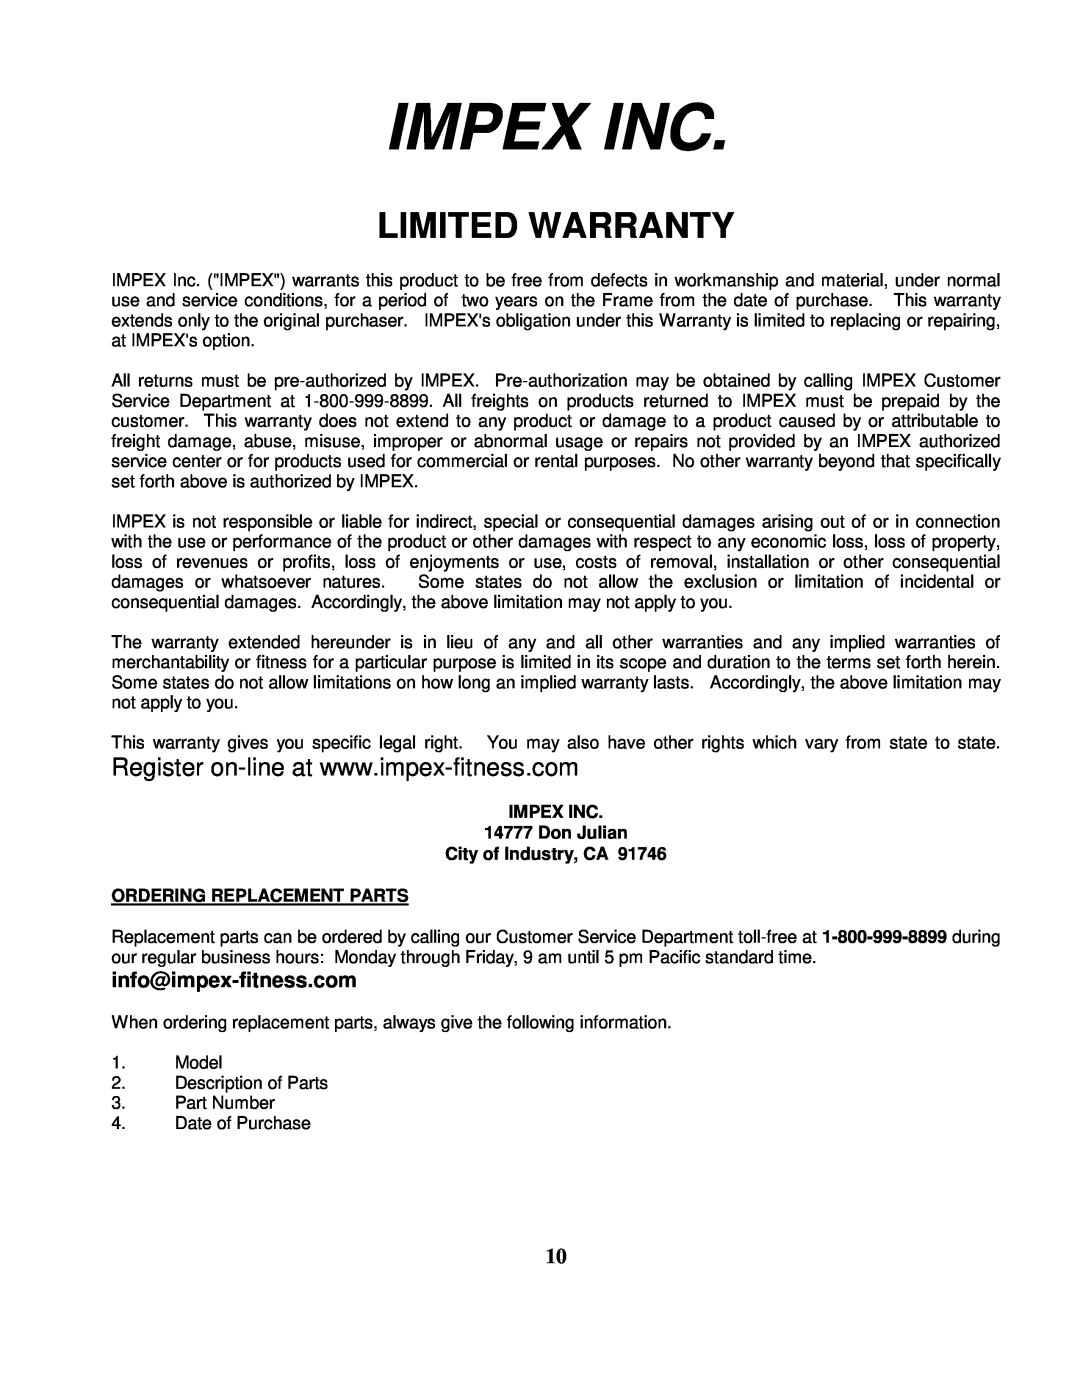 Impex PWR SURGE Impex Inc, Limited Warranty, IMPEX INC 14777 Don Julian City of Industry, CA, Ordering Replacement Parts 